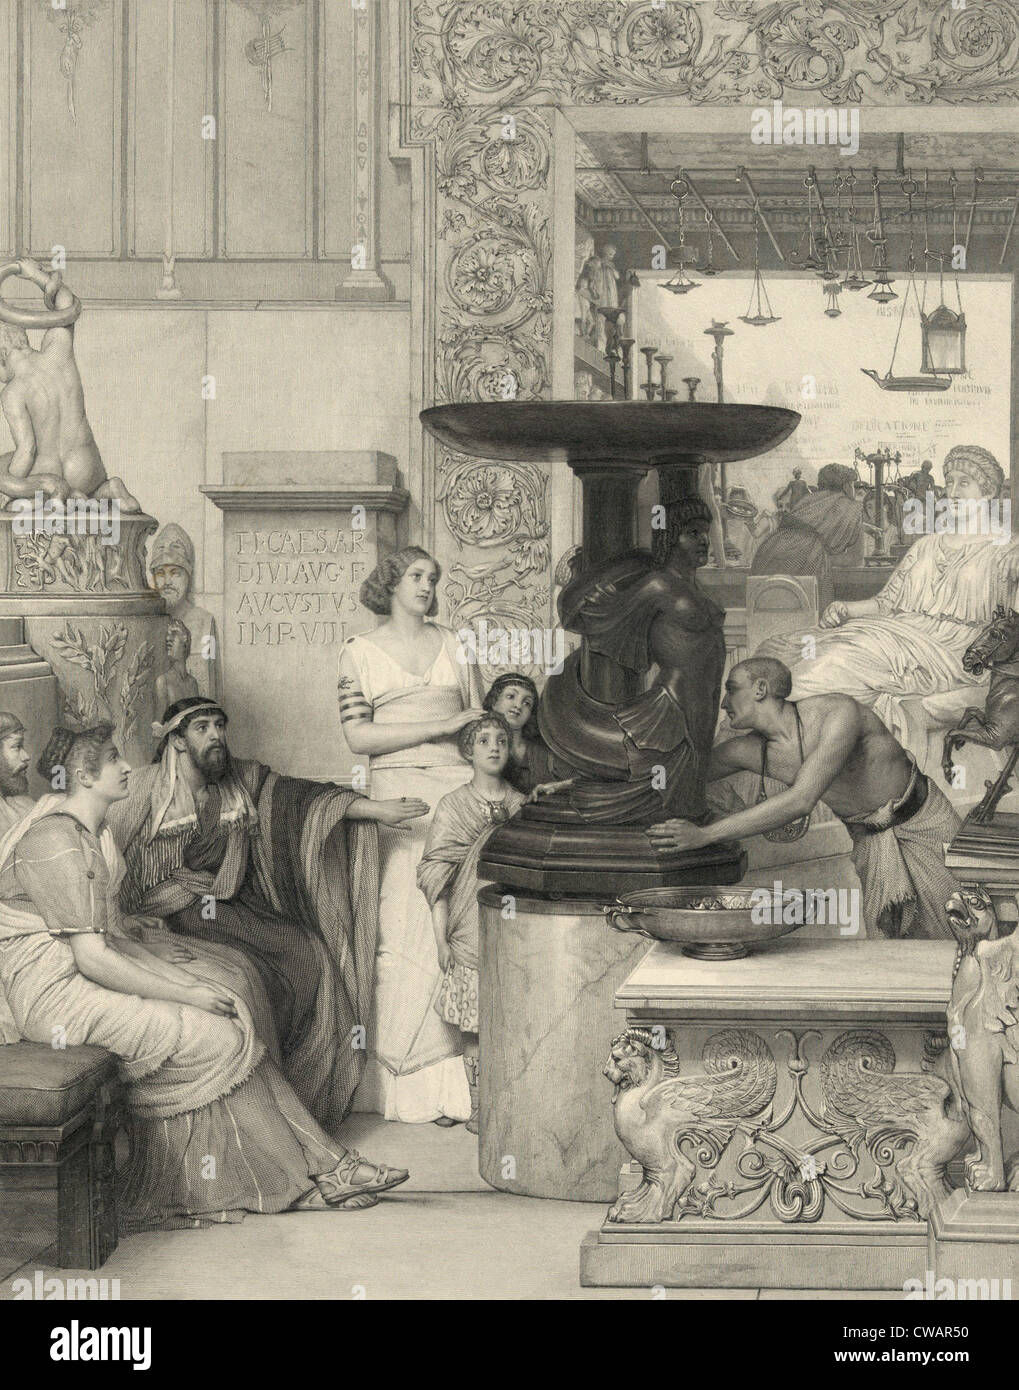 Print based on a Lawrence Alma Tadema (1836-1912) painting, showing a Roman family of men, women, and children admiring a Stock Photo